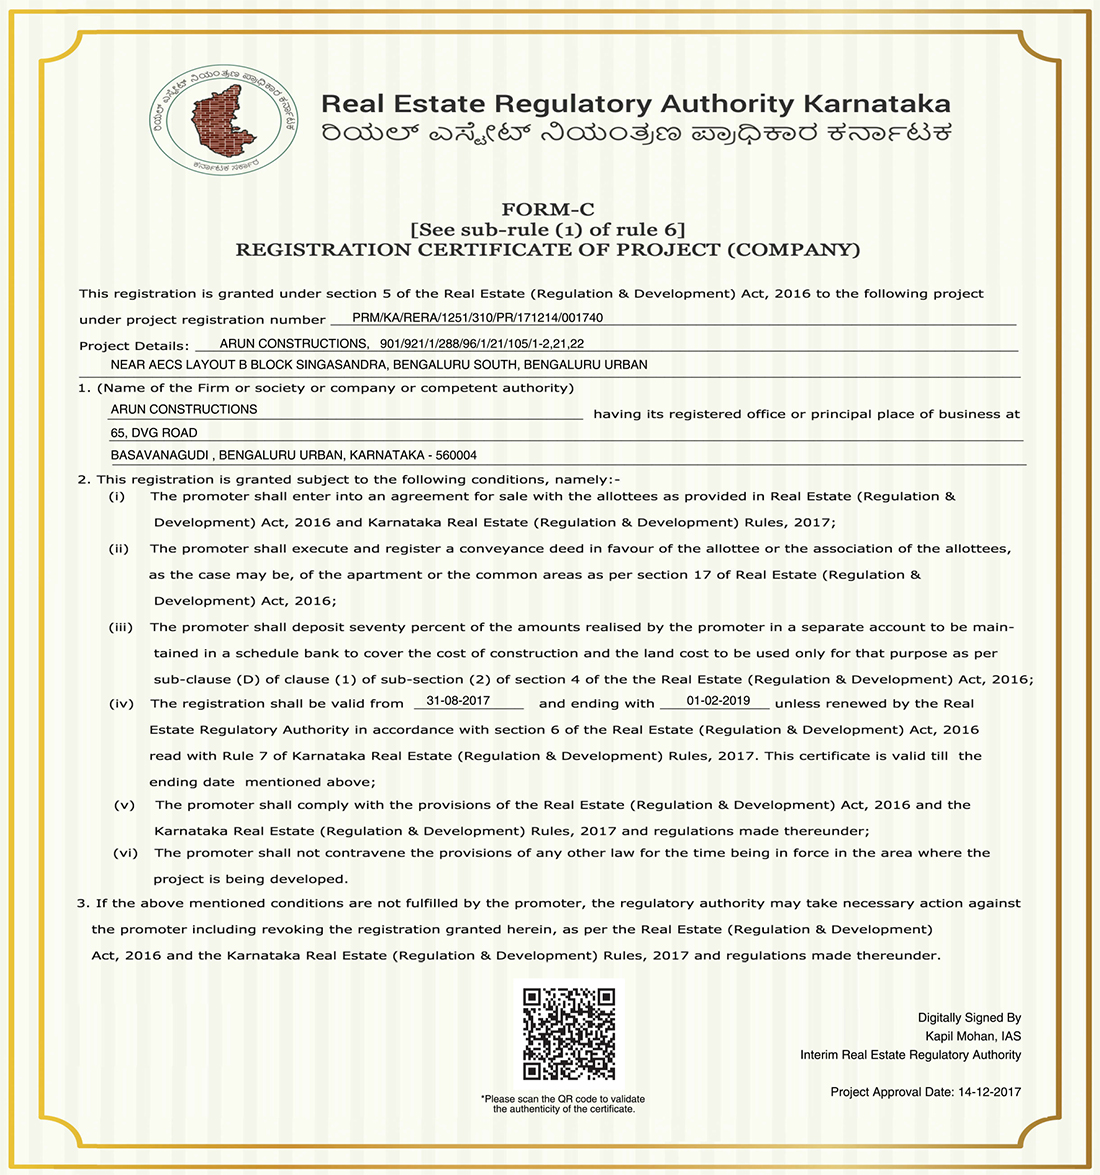 RERA registration certificate of Silicon tree project